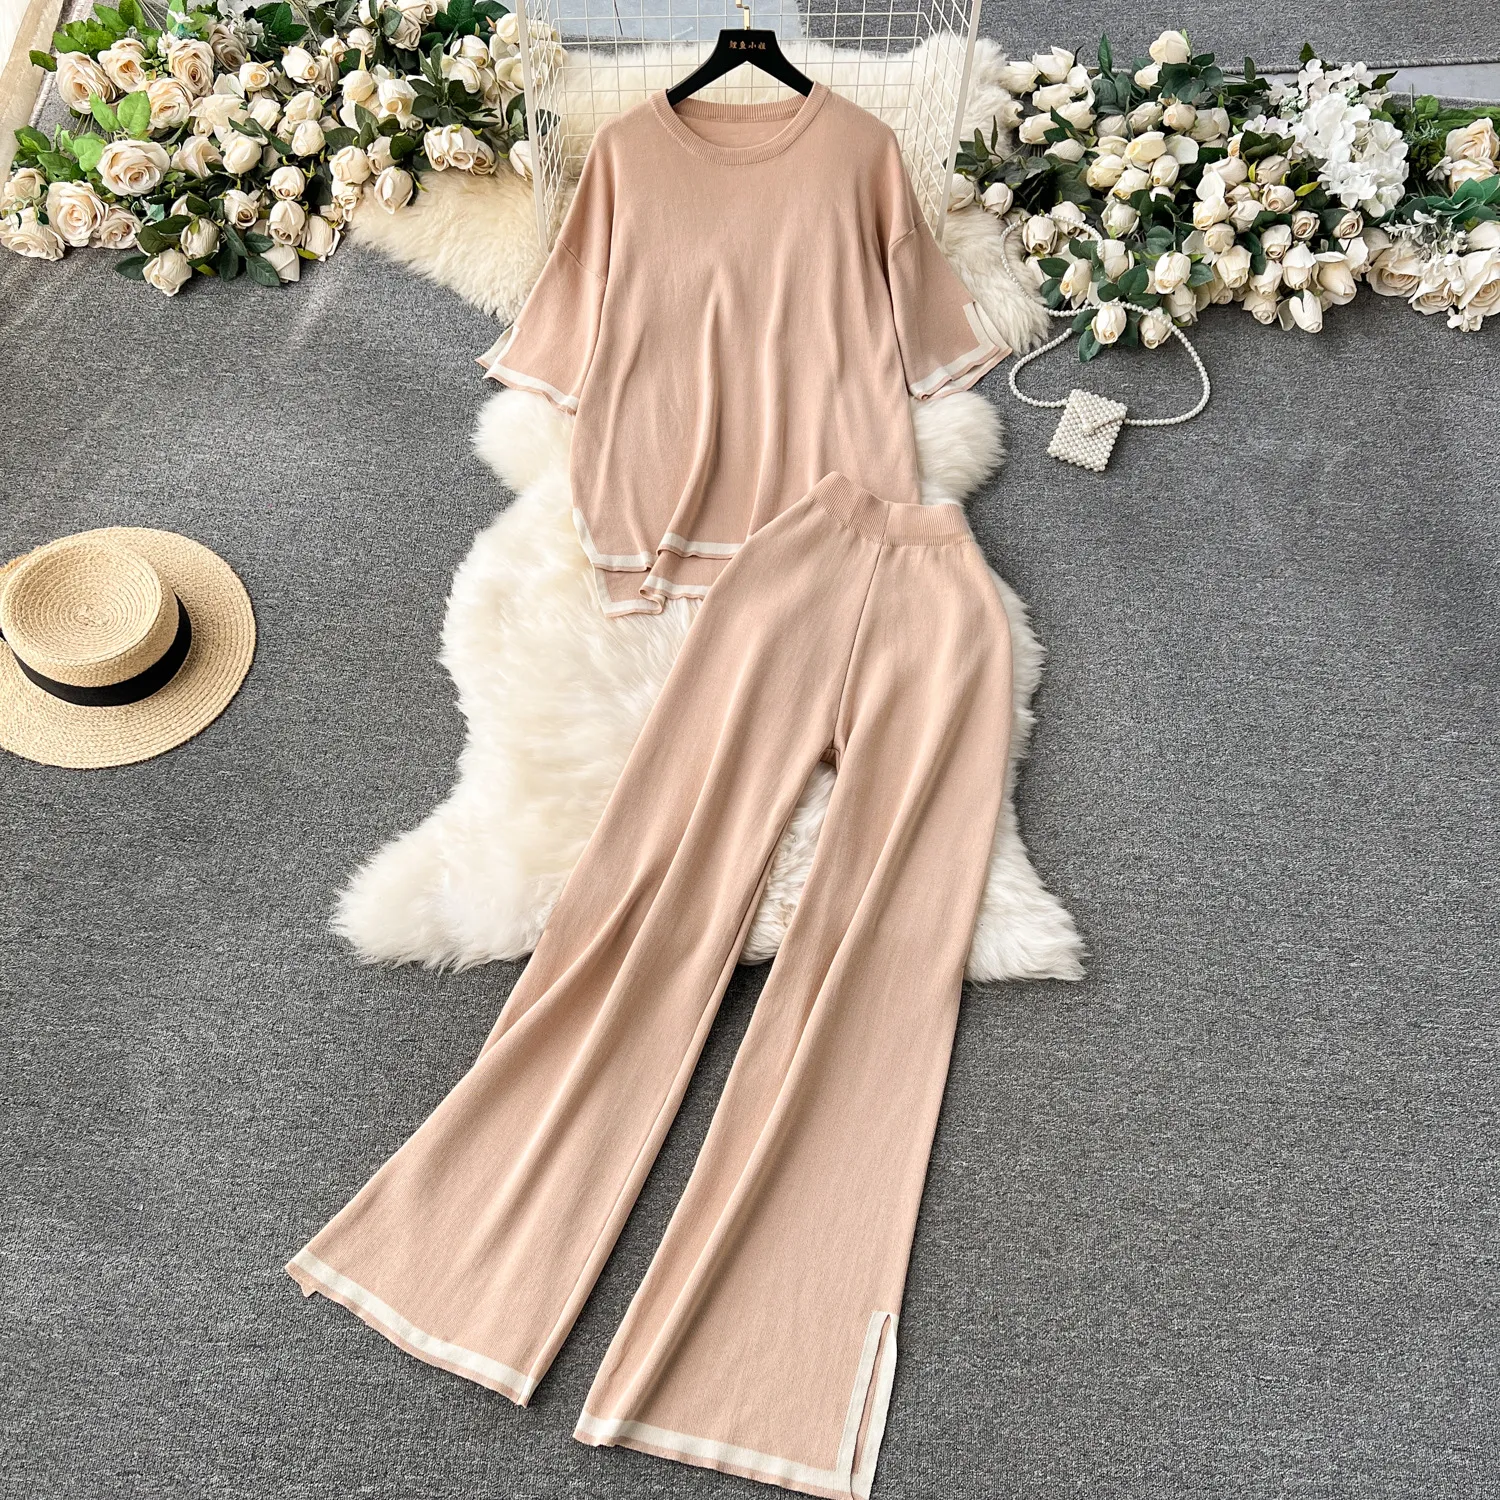 Retro lazy casual knit set for women with contrasting color loose slimming top and high waisted slimming wide leg pants